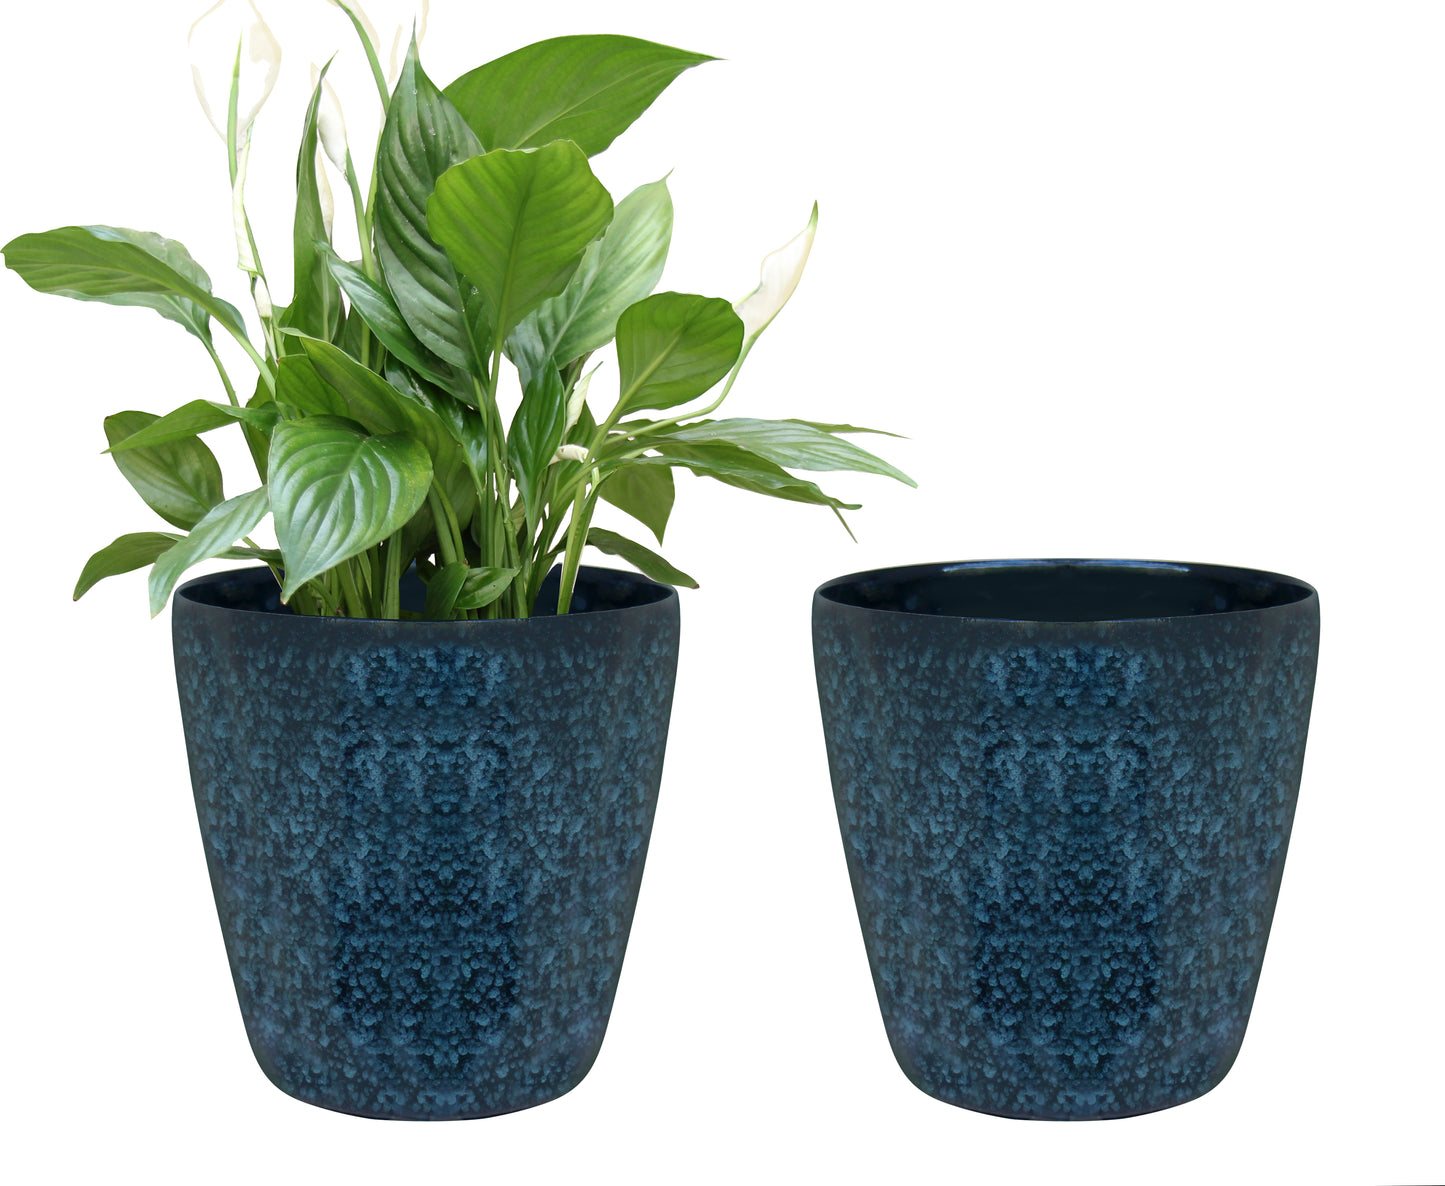 TABOR TOOLS Planters with Glossy Finish (3 Colors, 2 Models)